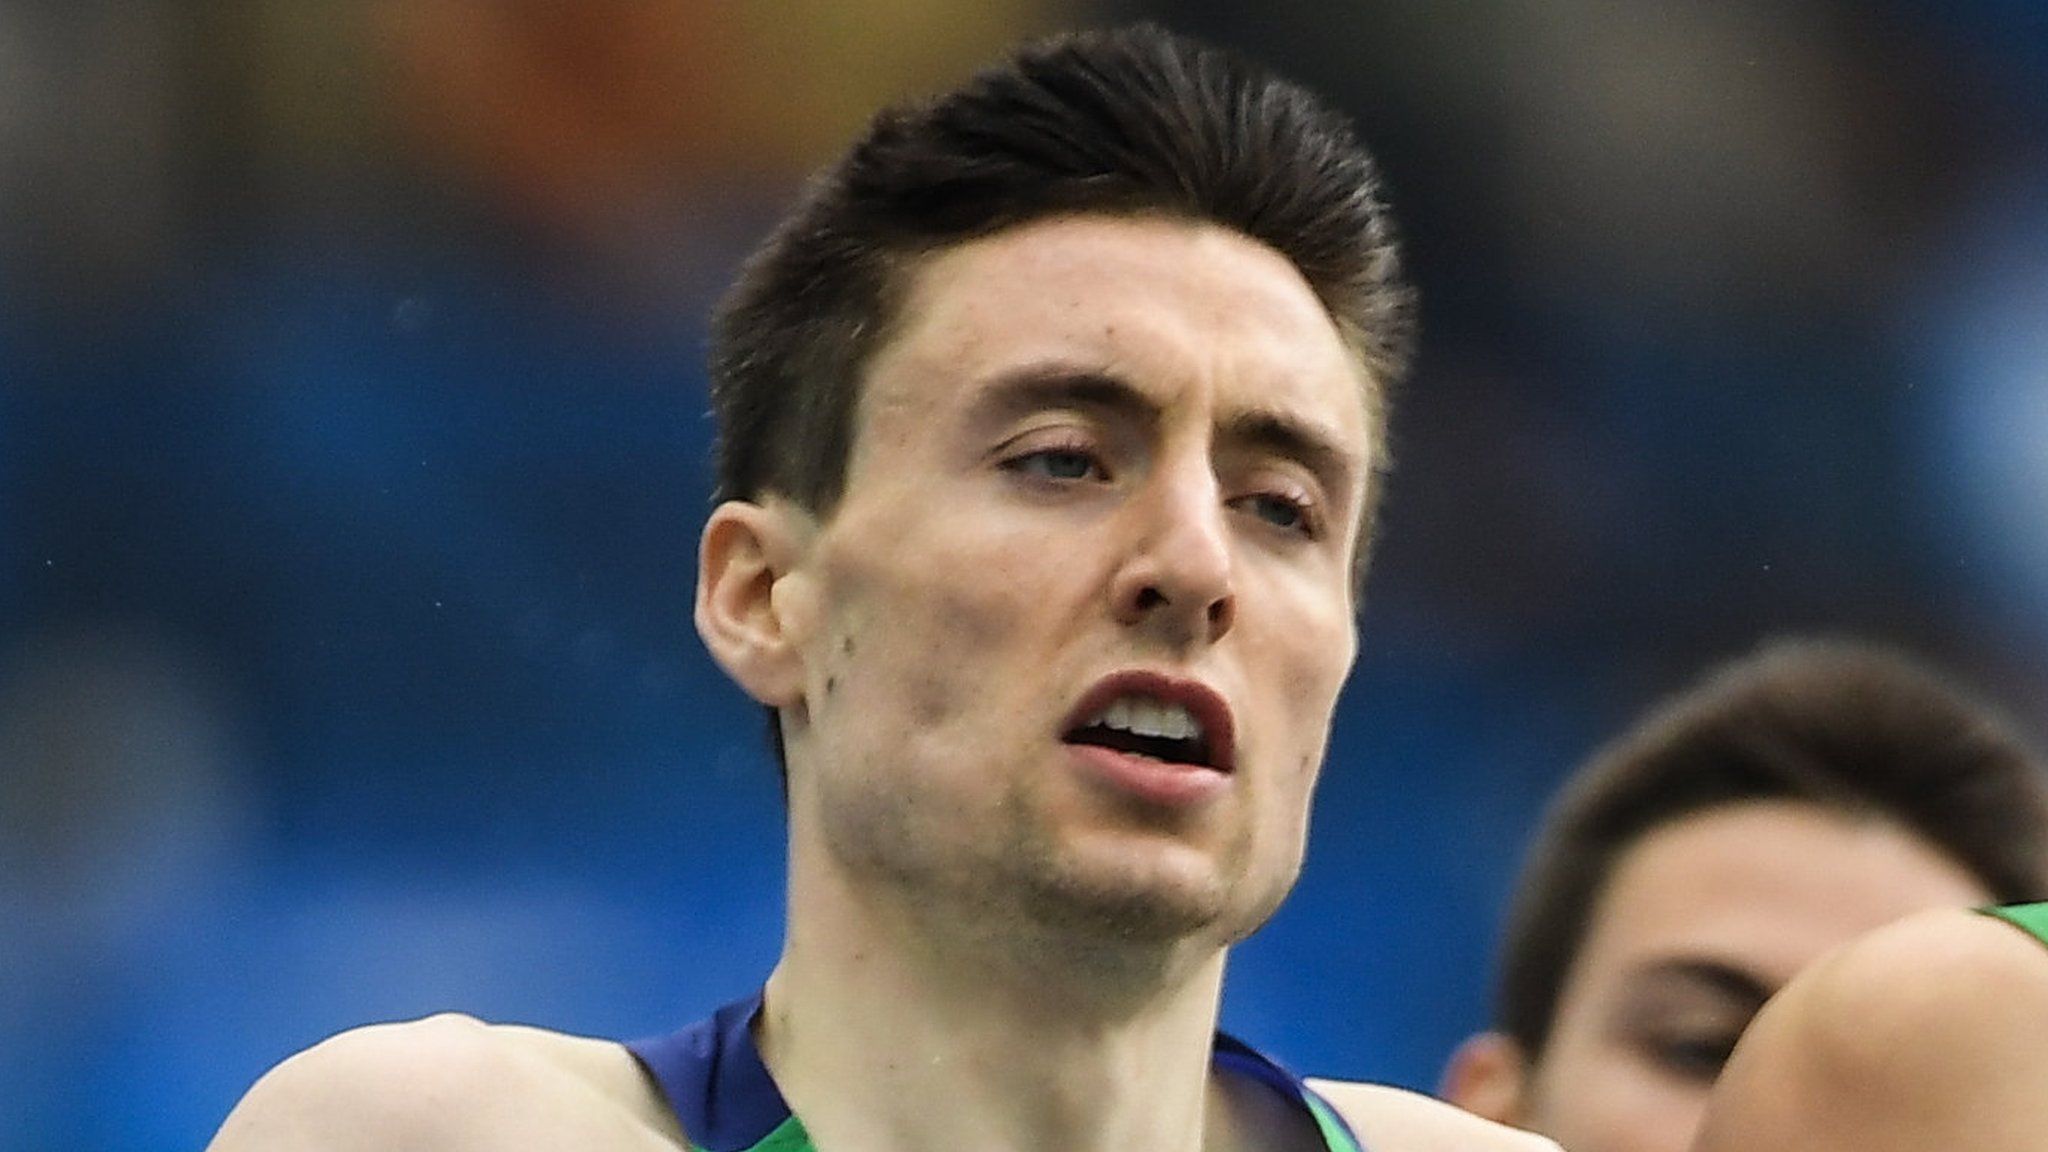 Mark English ran a composed race in his 800m heat in Rio